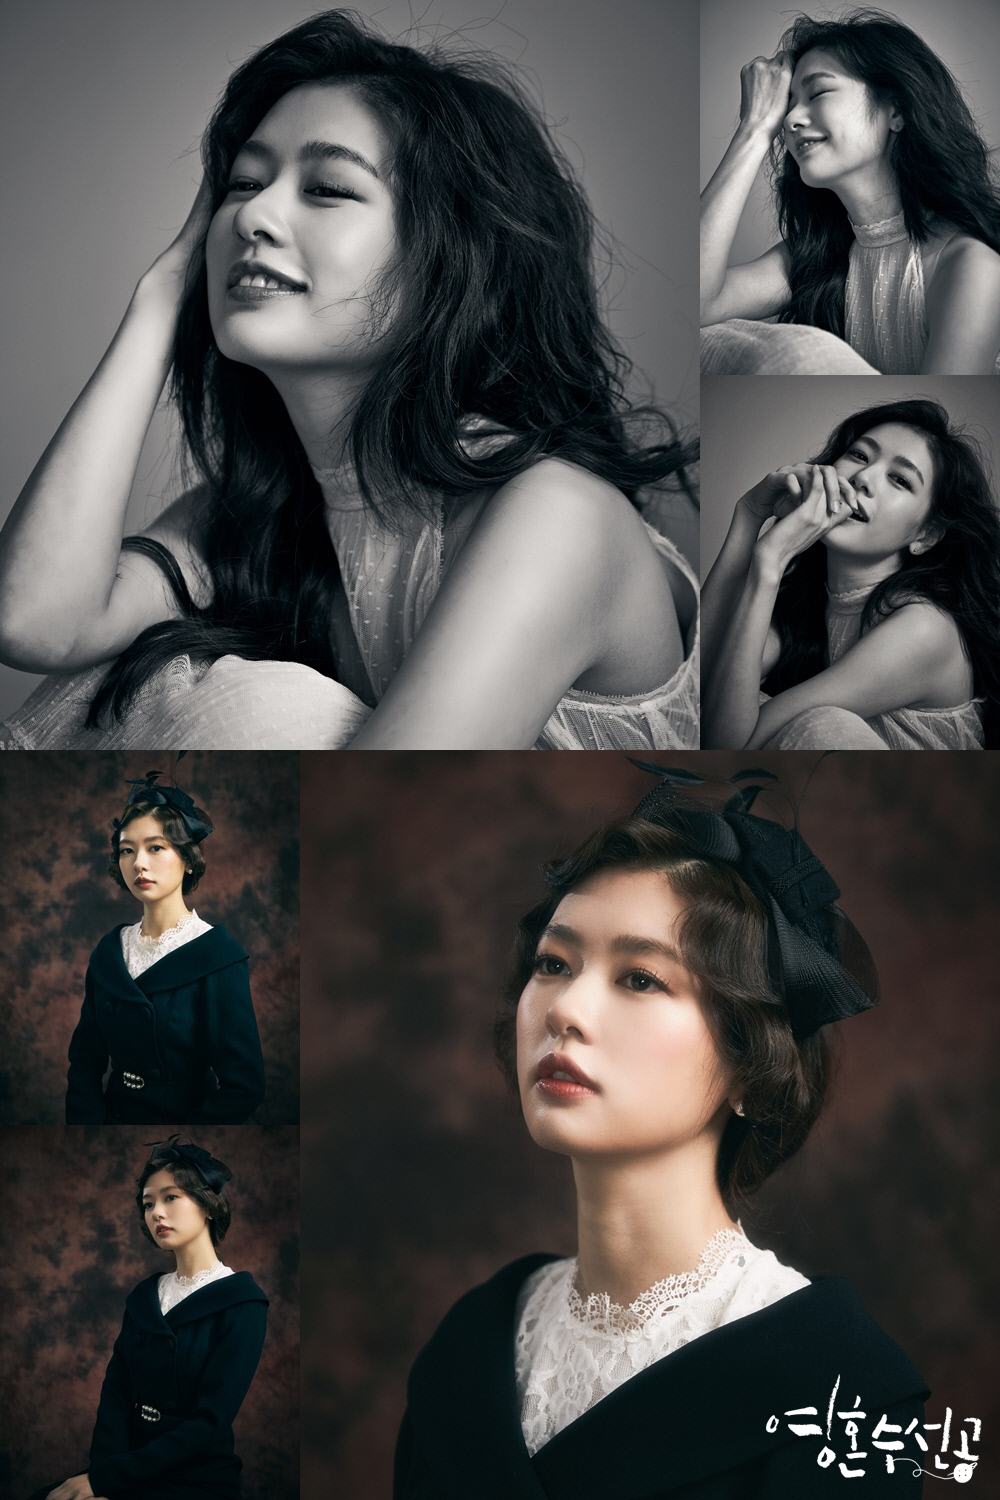 Jung So-min, a soul-spinner, predicted a perfect transformation into a musical rising star, Han Space, while a profile photo of Spaces unique charm was released in the play.Jung So-min has perfected two styles of Supernatural Siks black and white version and alluring modern version, raising expectations for Drama.KBS 2TV Tree Drama Soul Soo-Seong (directed by Yoo Hyun-ki/playplayplay by Lee Hyang-hee/produced monster union), which will be broadcast on May 6, released two versions of the profile photo of musical actor Han Space (Jung So-min) on April 30 (Thursday).Space is a character who has settled a long unknown life and finally became a musical rising star. It is an effort that no one can win as much as passion for the stage.However, as a musical actor, he is caught up in the event of fate and is in a big crisis and unintentionally entangled with a psychiatrist, Shin Ha-kyun.Among them, Spaces profile photos are released and are the topic.Supernatural black and white profiles and seductive modern profile space each show off their different charms.First, Space in black and white profile created a chic atmosphere with natural laughter and comfortable pose.The modern version captures my attention by perfectly expressing the main character who is so storyless that it can be climbed on the musical casting board right now.As such, Space has proved to be a rising blue chip in the musical world with visuals that seem to be free-passing any audition.In the previous release of Teaser and Image, I could see another attraction of Space: a little strange and a little bad under the stage, making people laugh.However, it is expected that the end of the reversal charm that she will show will be like the profile picture of Space, which is the image of the heavenly musical actor.Space has completely digested all two versions of the profile photos, said the soul repairman. I would like to ask for your attention to what will happen before her, who knew she would only walk on the success road.Shin Ha-kyun and Jung So-mins healing chemistry and Yoo Hyun-kis PD-Lee Hyanghees heartwarming story, The Soul Sui Seongong, which is expected to be broadcast on KBS 2TV on Wednesday, May 6.